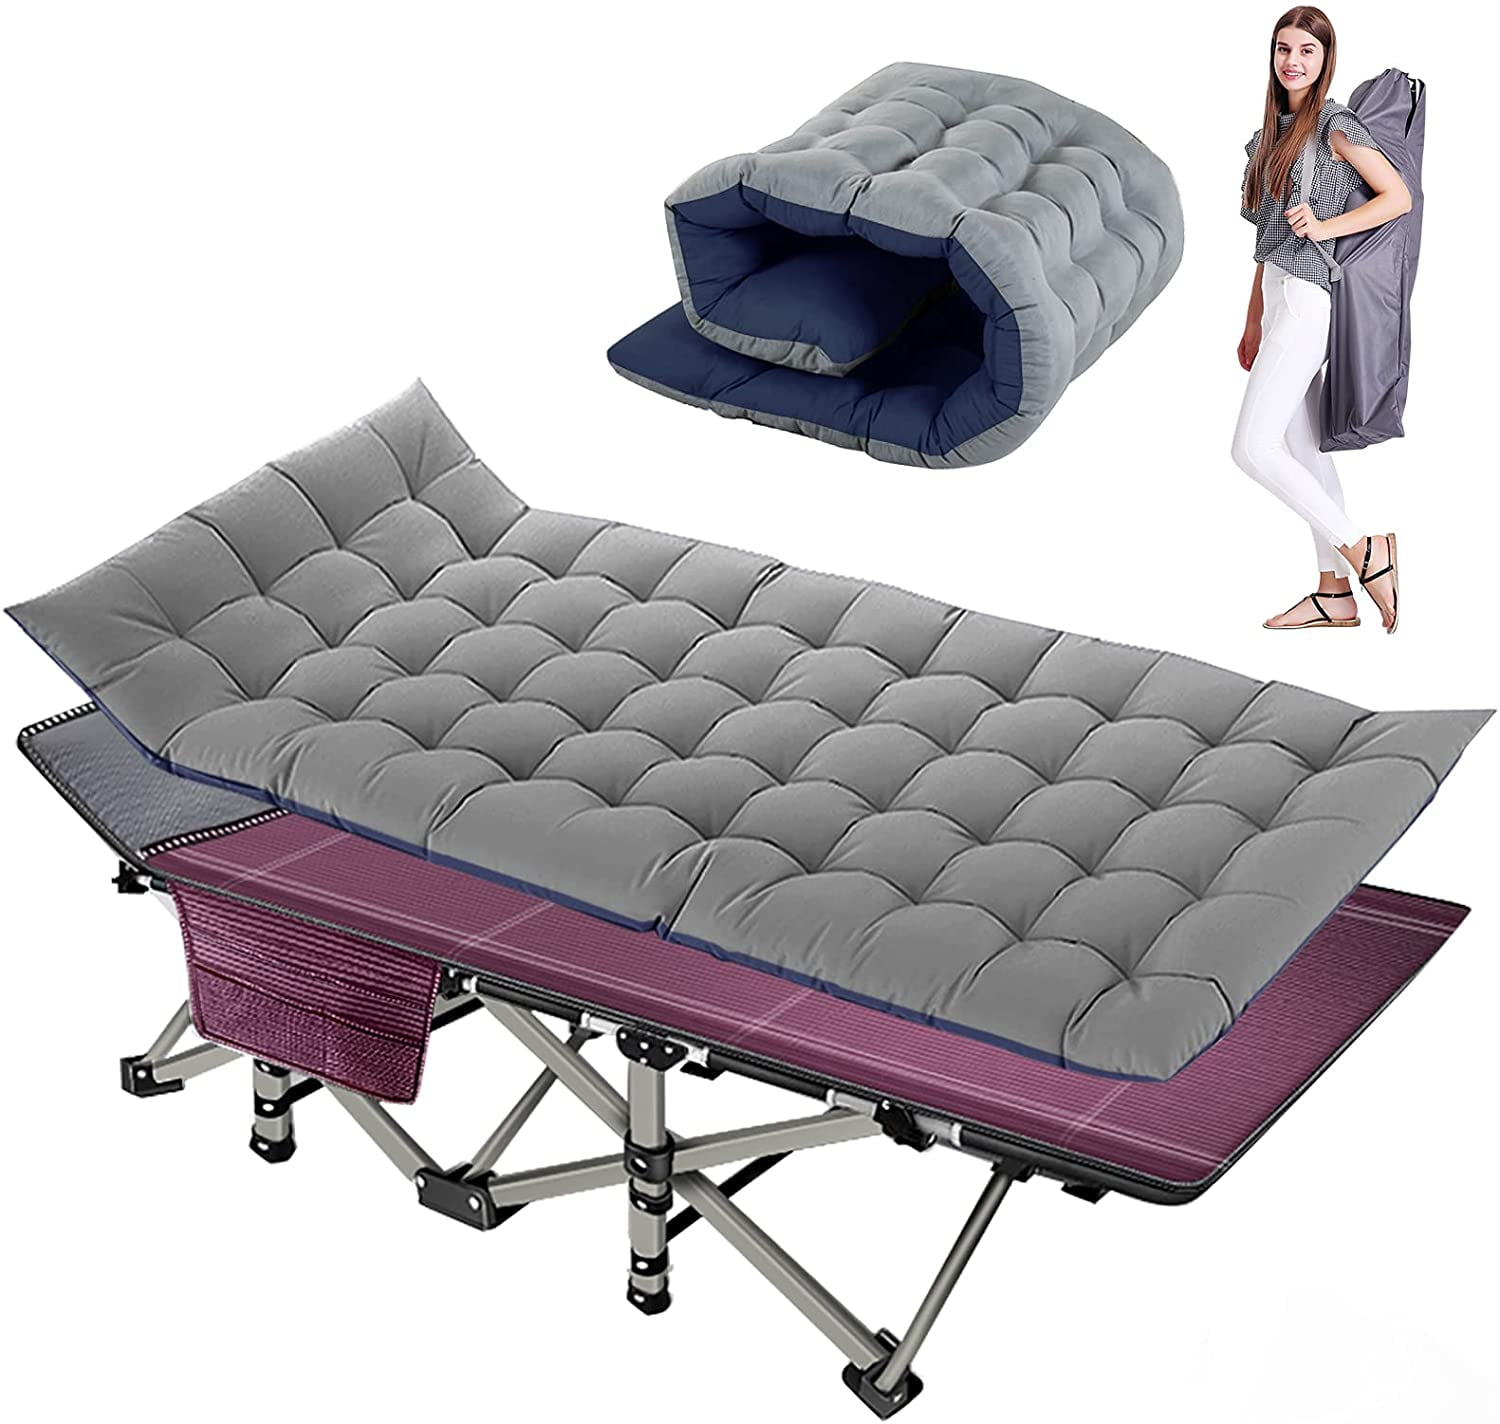 Portable Folding Camp Cot Adult Heavy Duty 75*26" Sturdy Sleep Bed Travel Office 